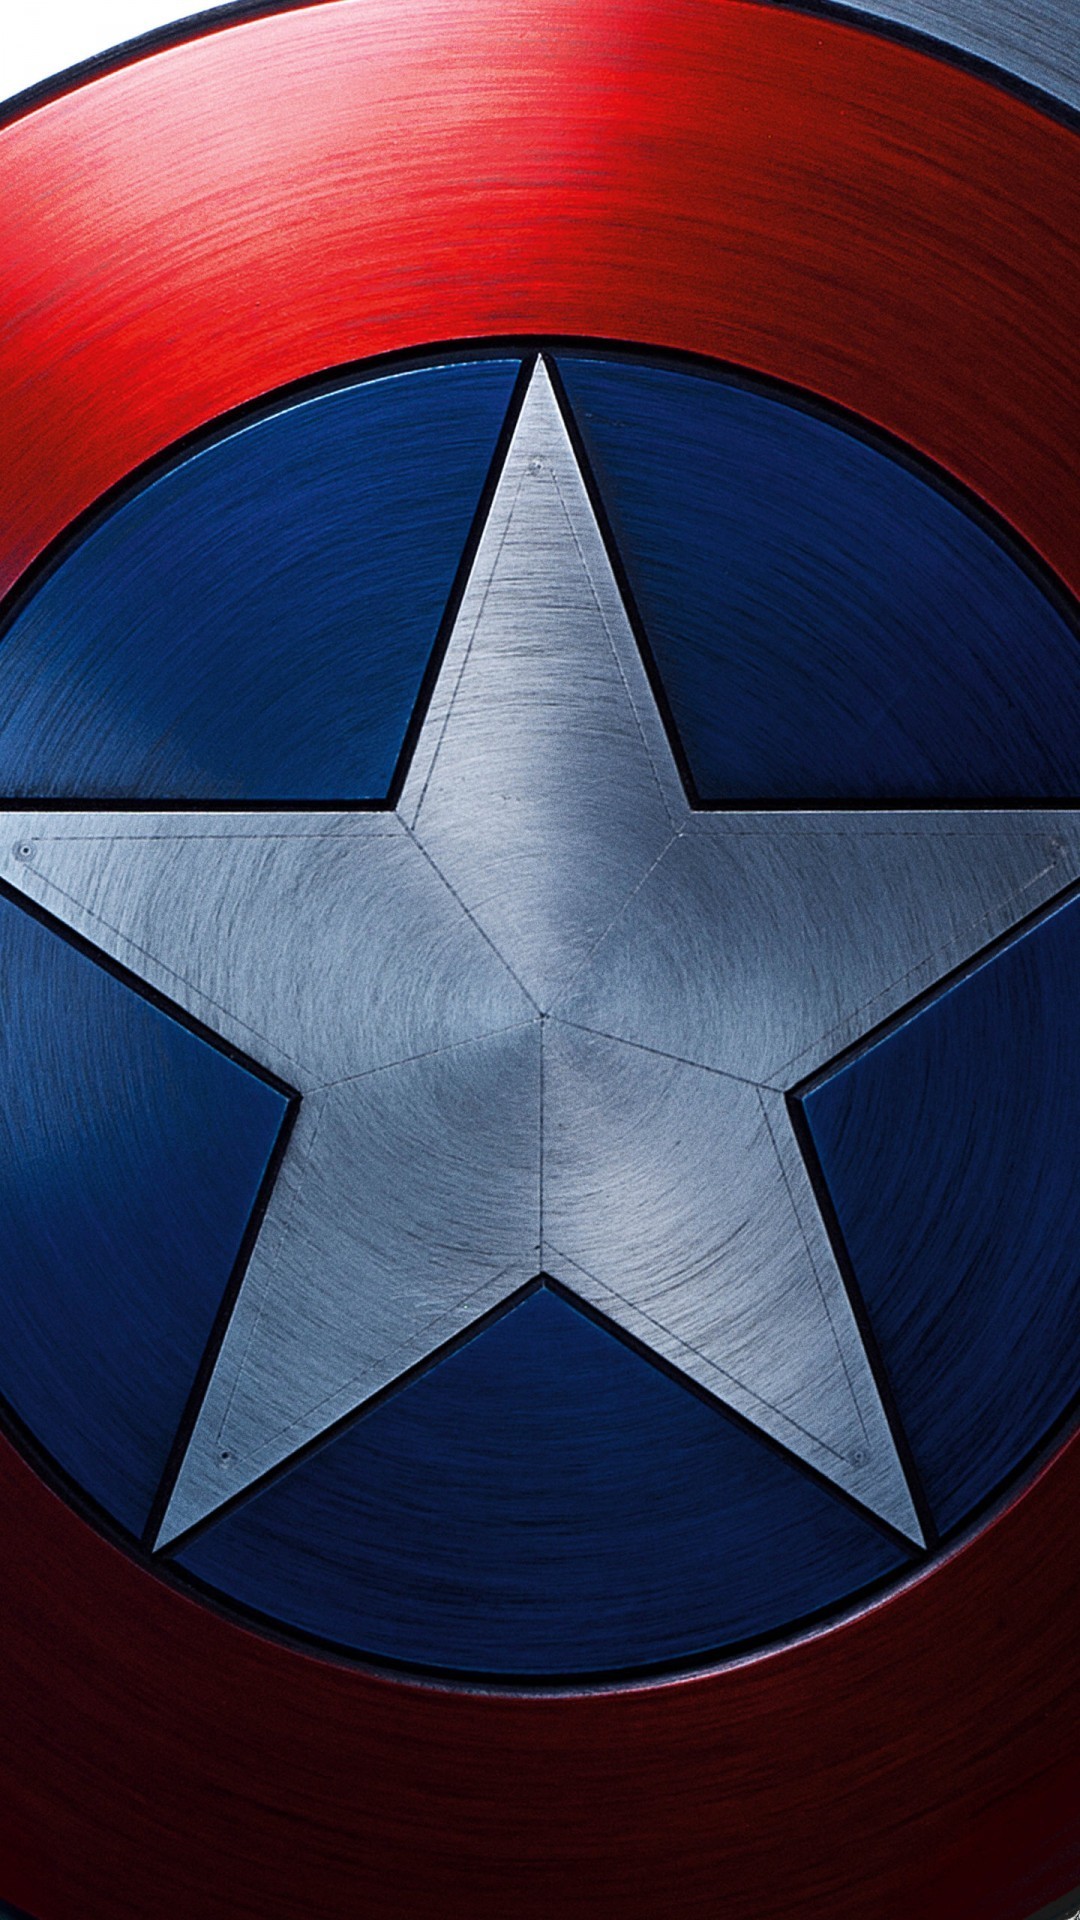 1080x1920 ... iPhone | Apple Lives Captain America Civil War HD Wallpapers for  iPhoneWallpapers.